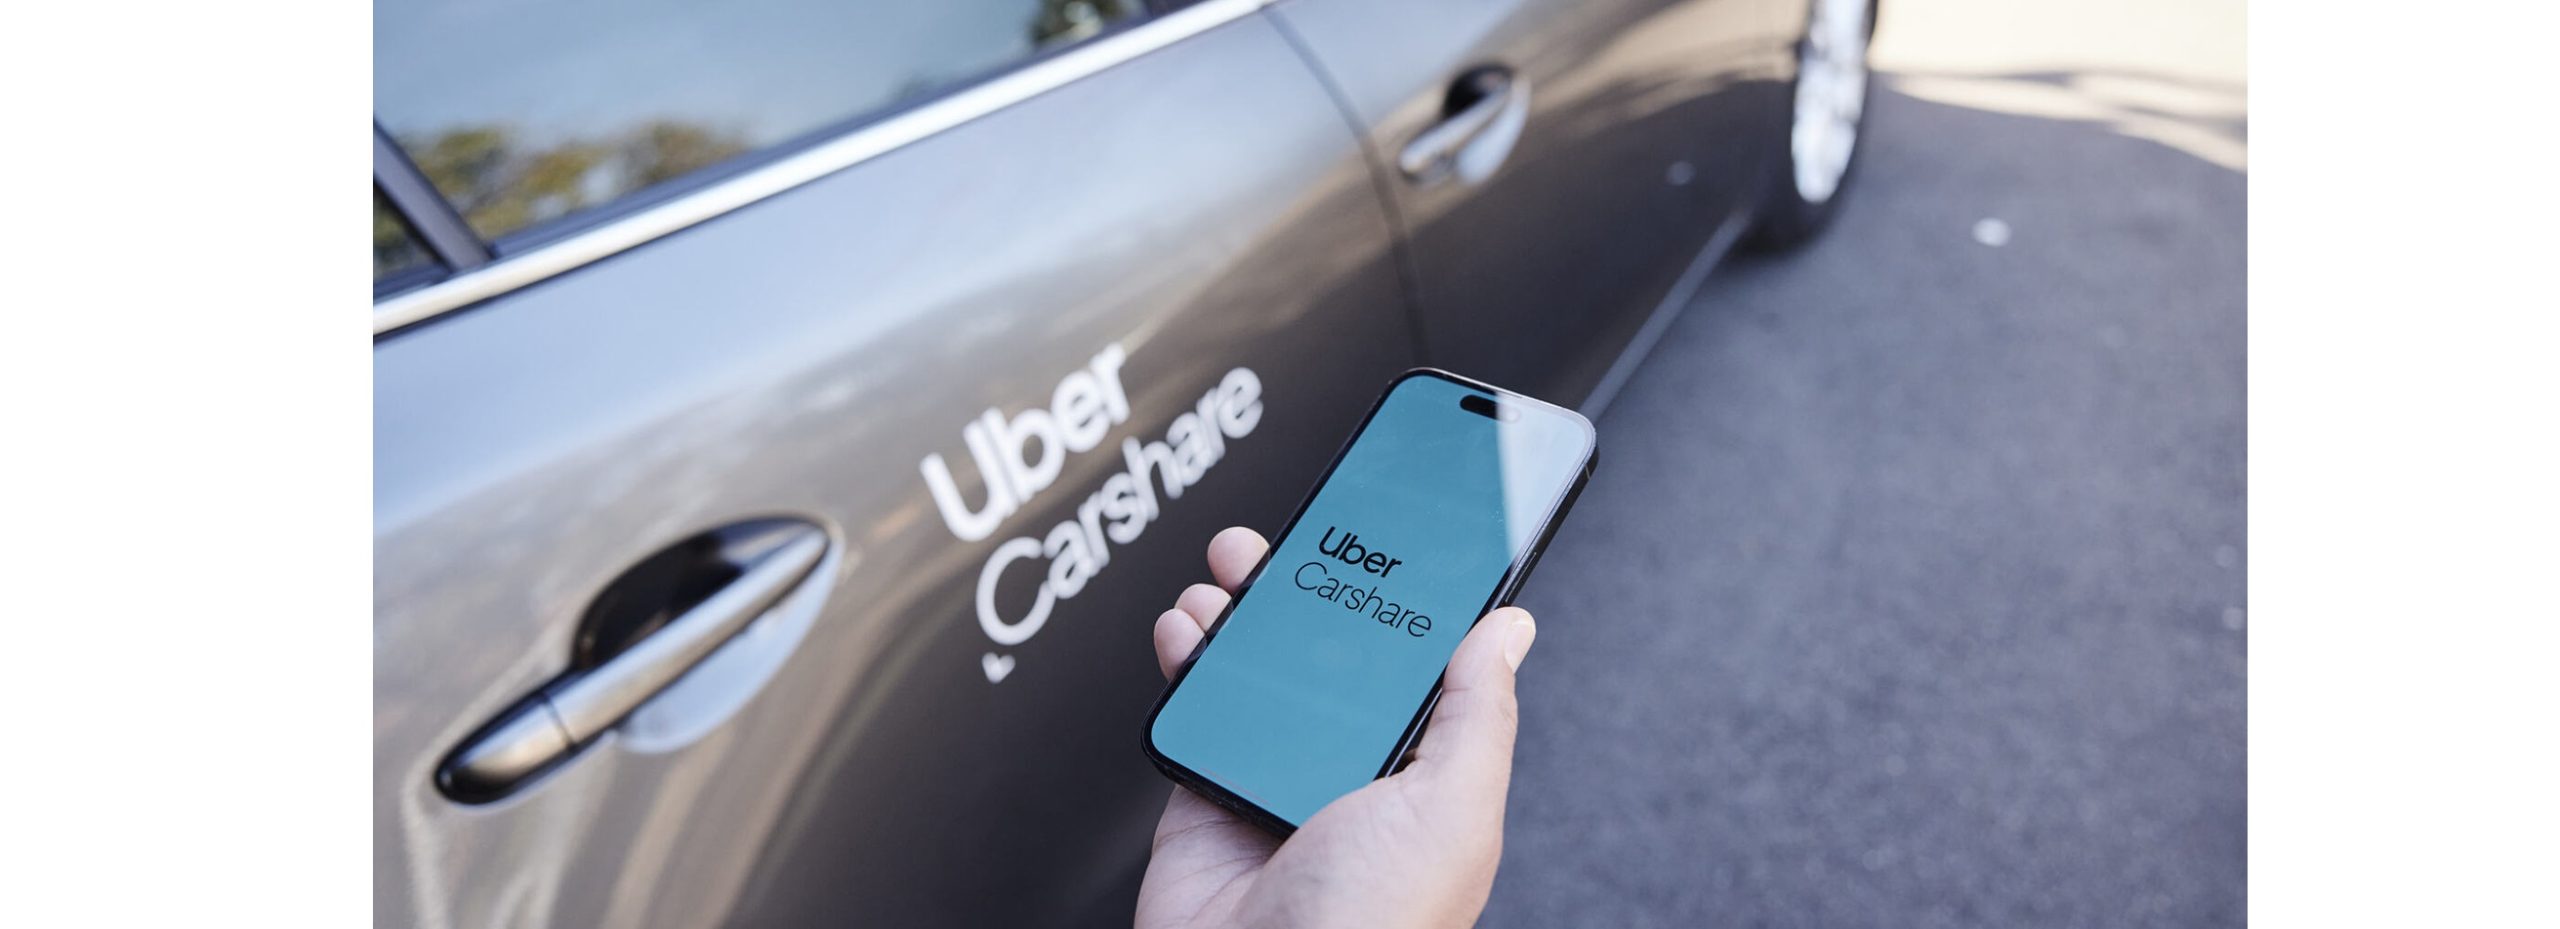 HUMAX teams up with Uber Carshare for mobility services